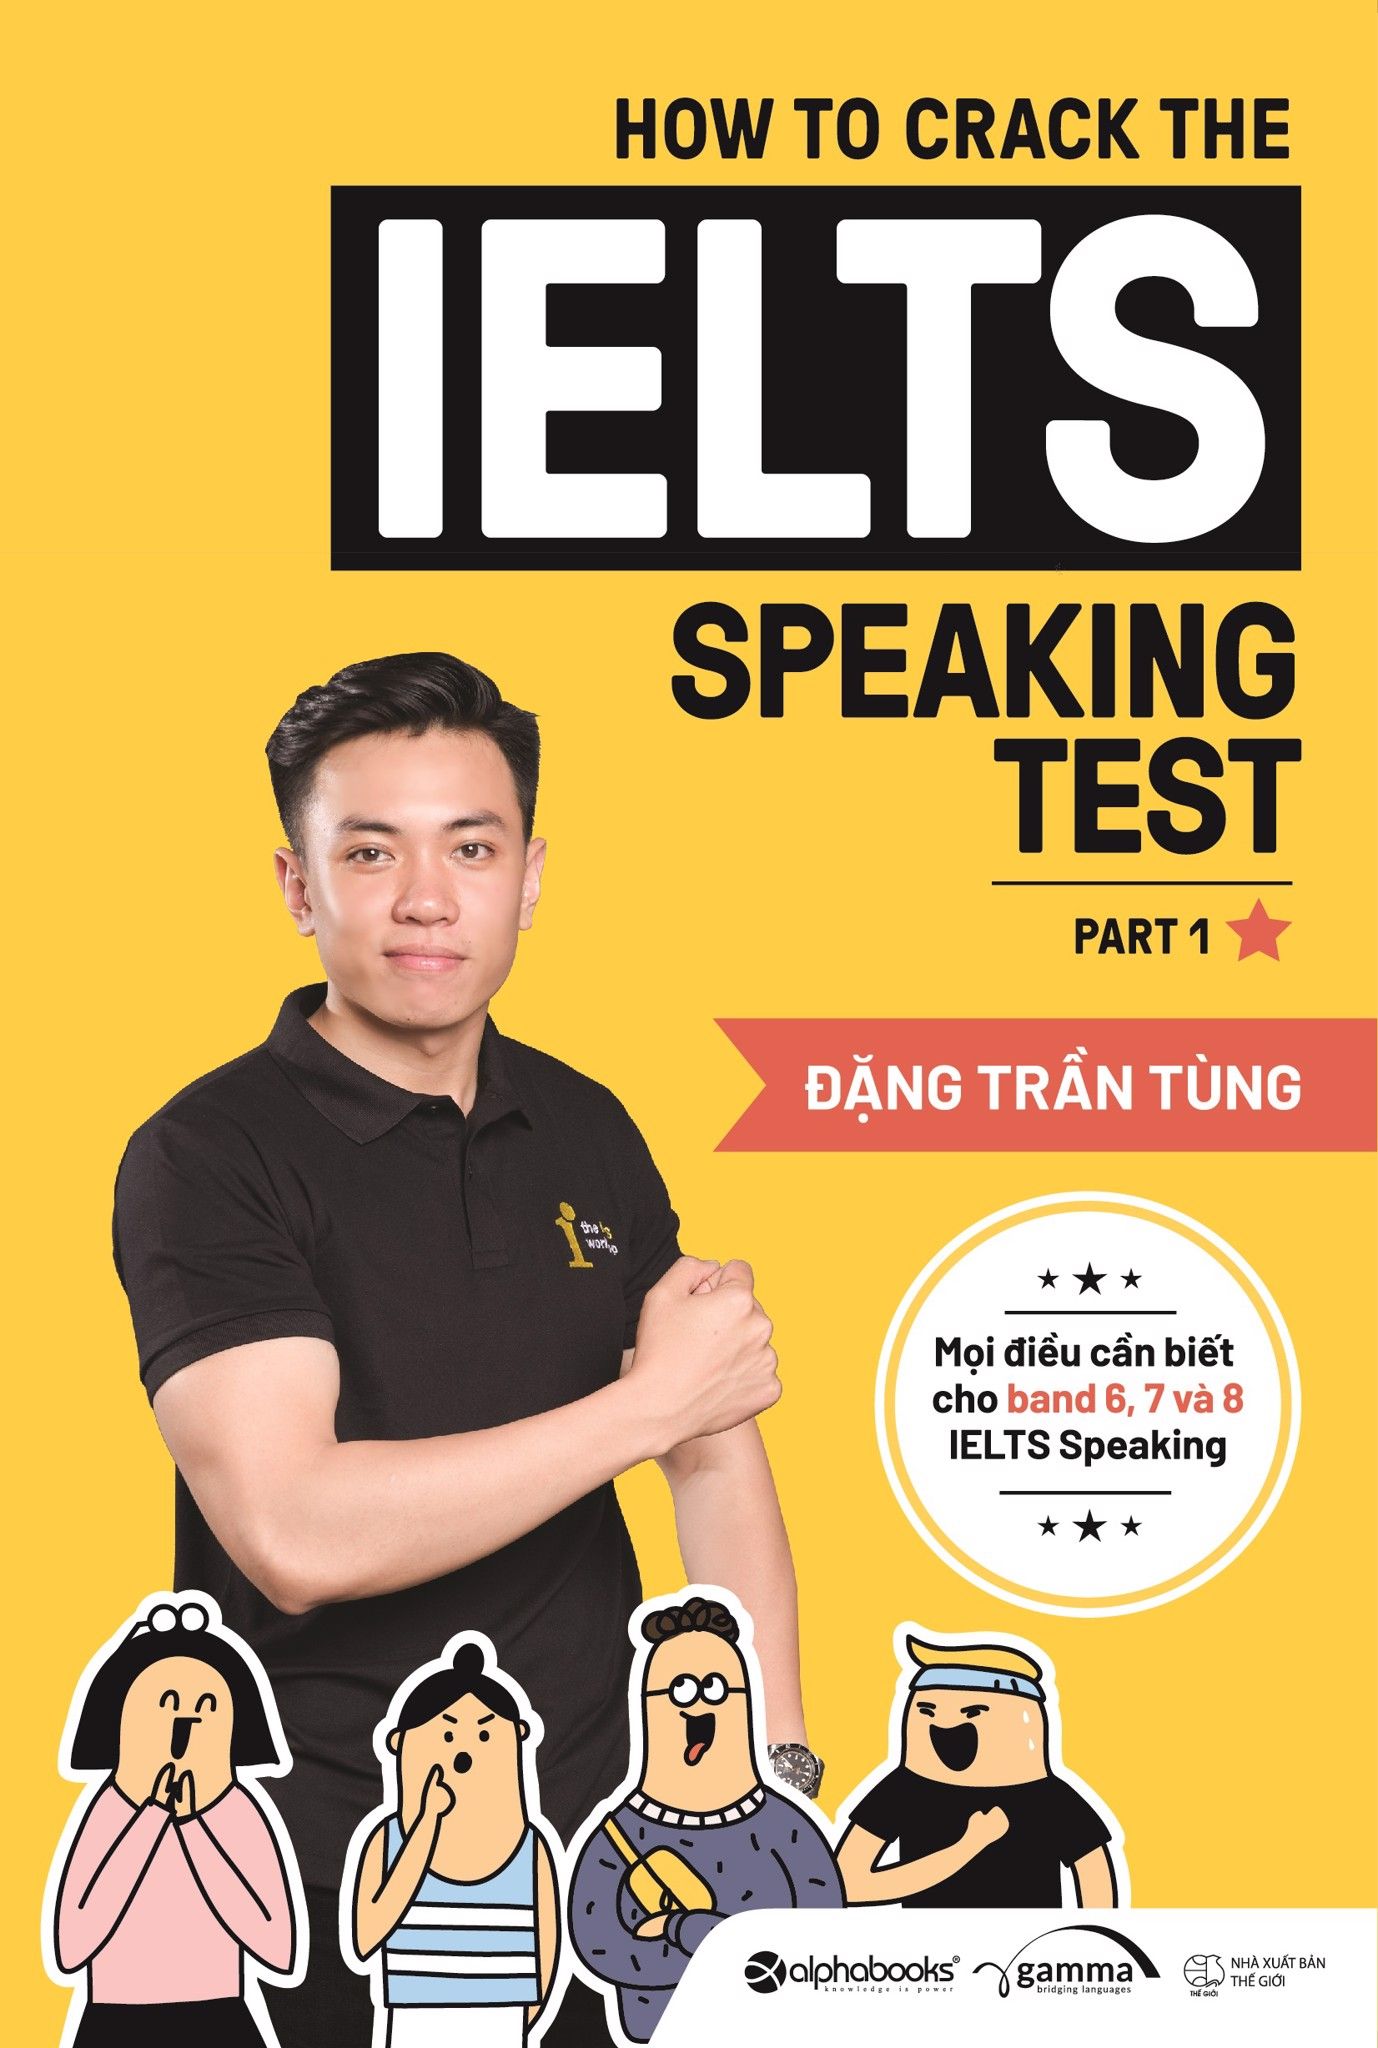  How To Crack The IELTS Speaking Test - Part 1 